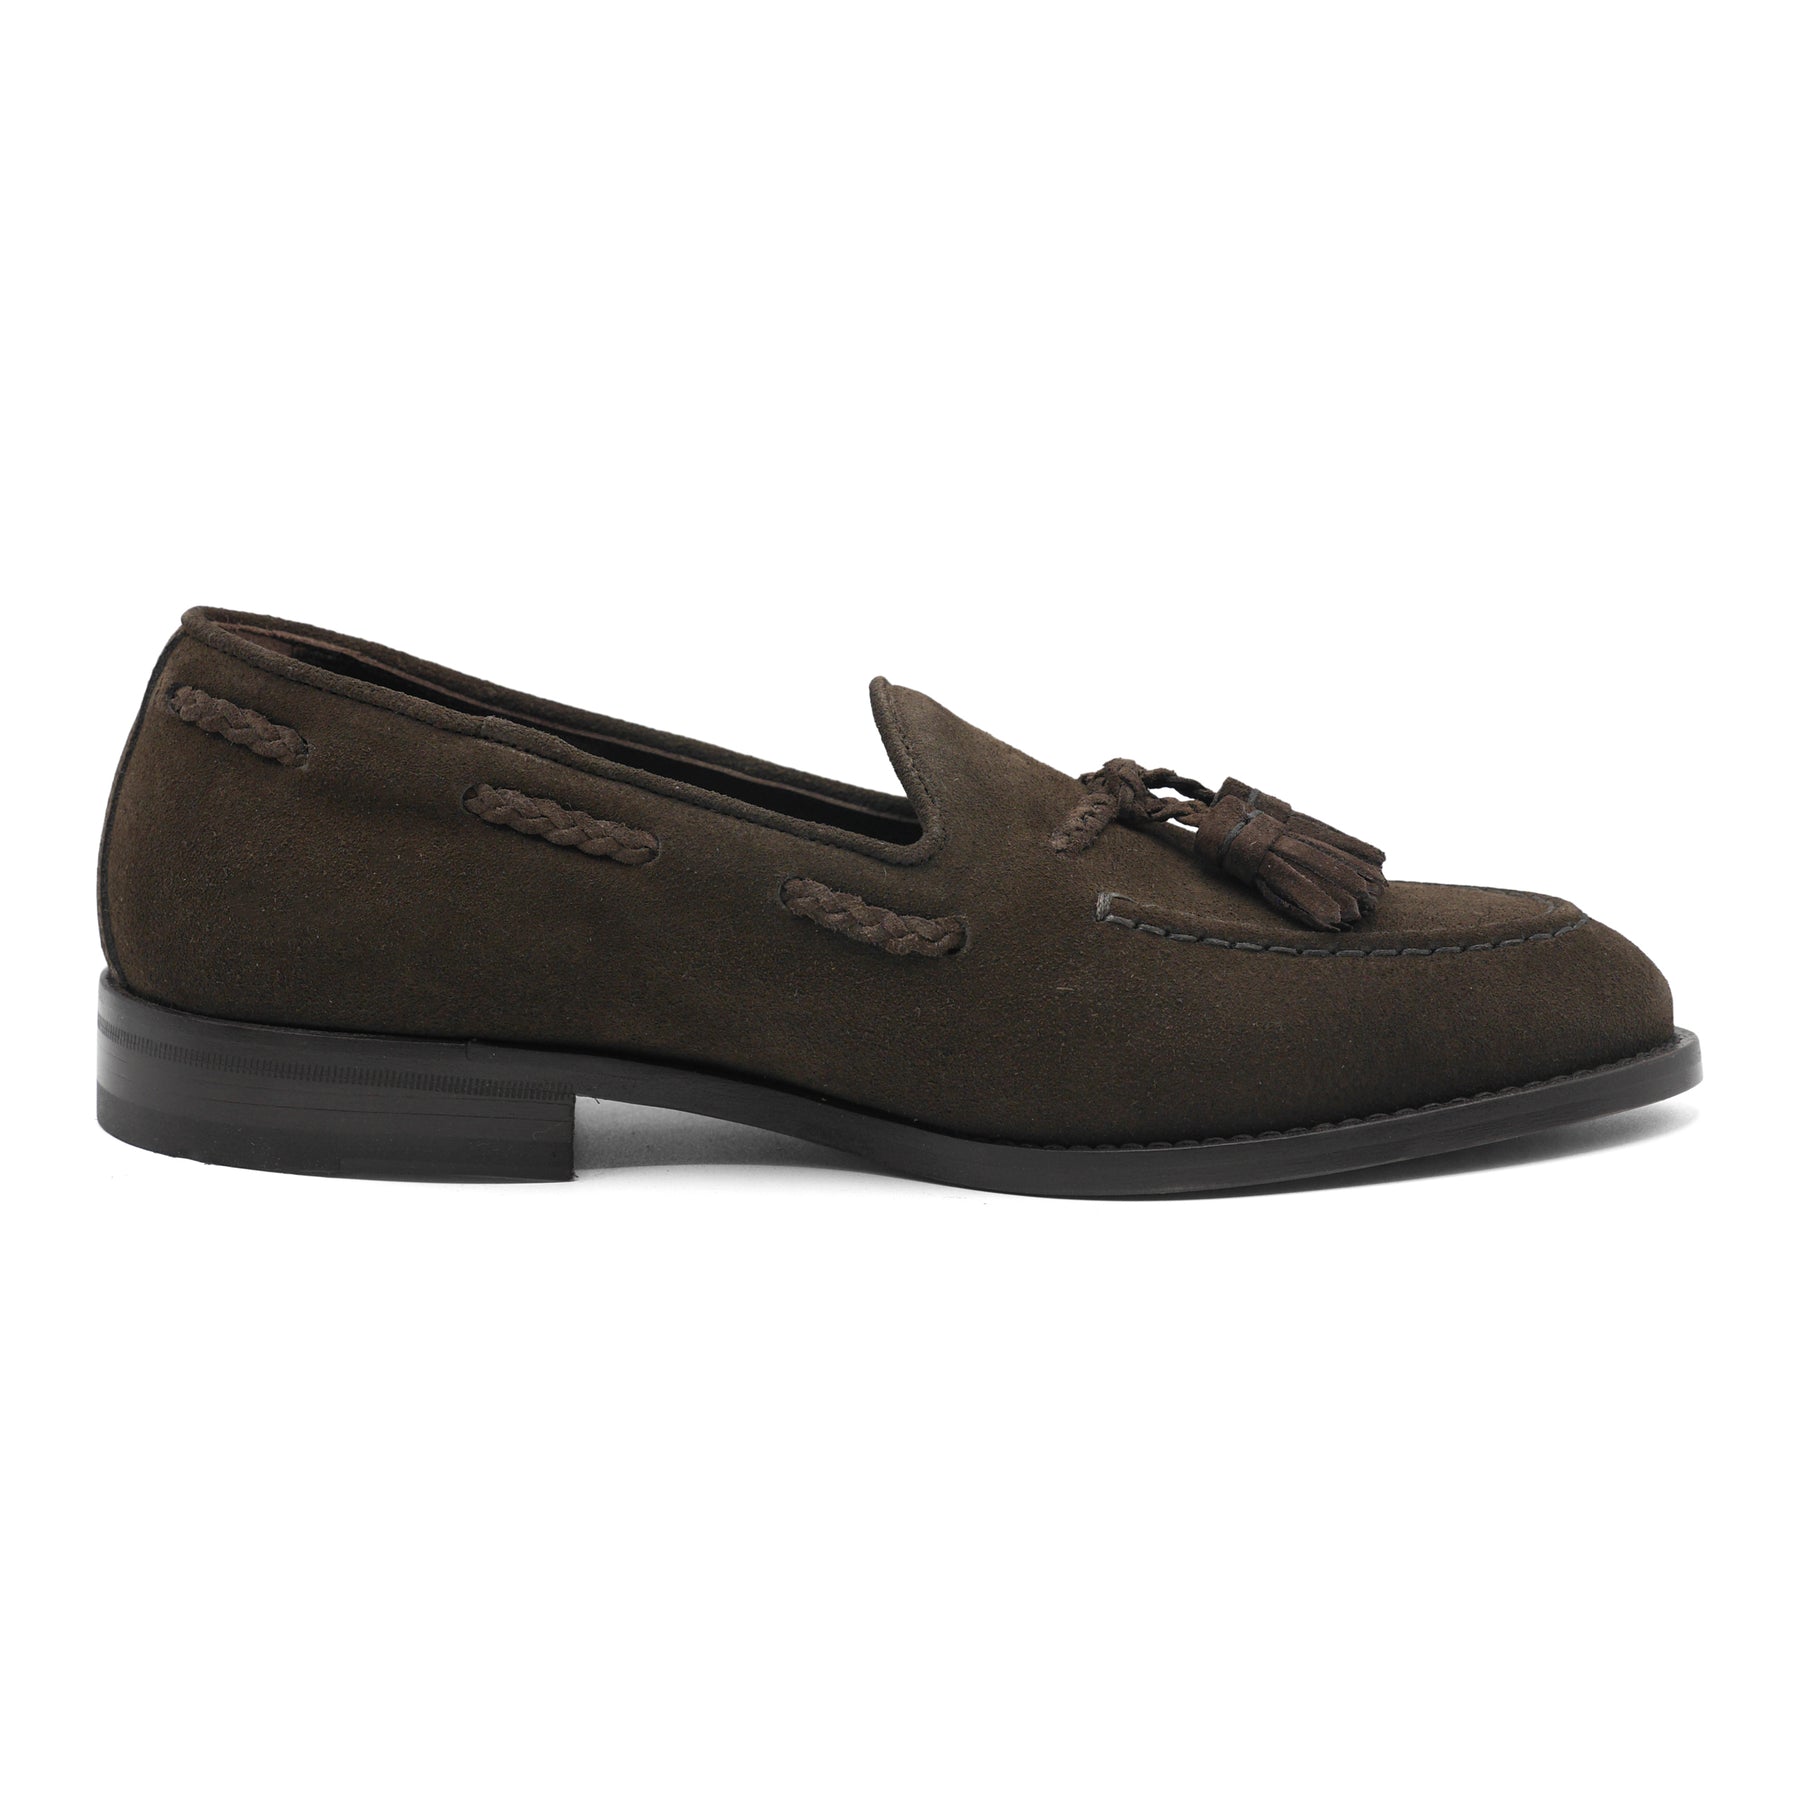 PM0H2 - Classic Brown Suede Loafer